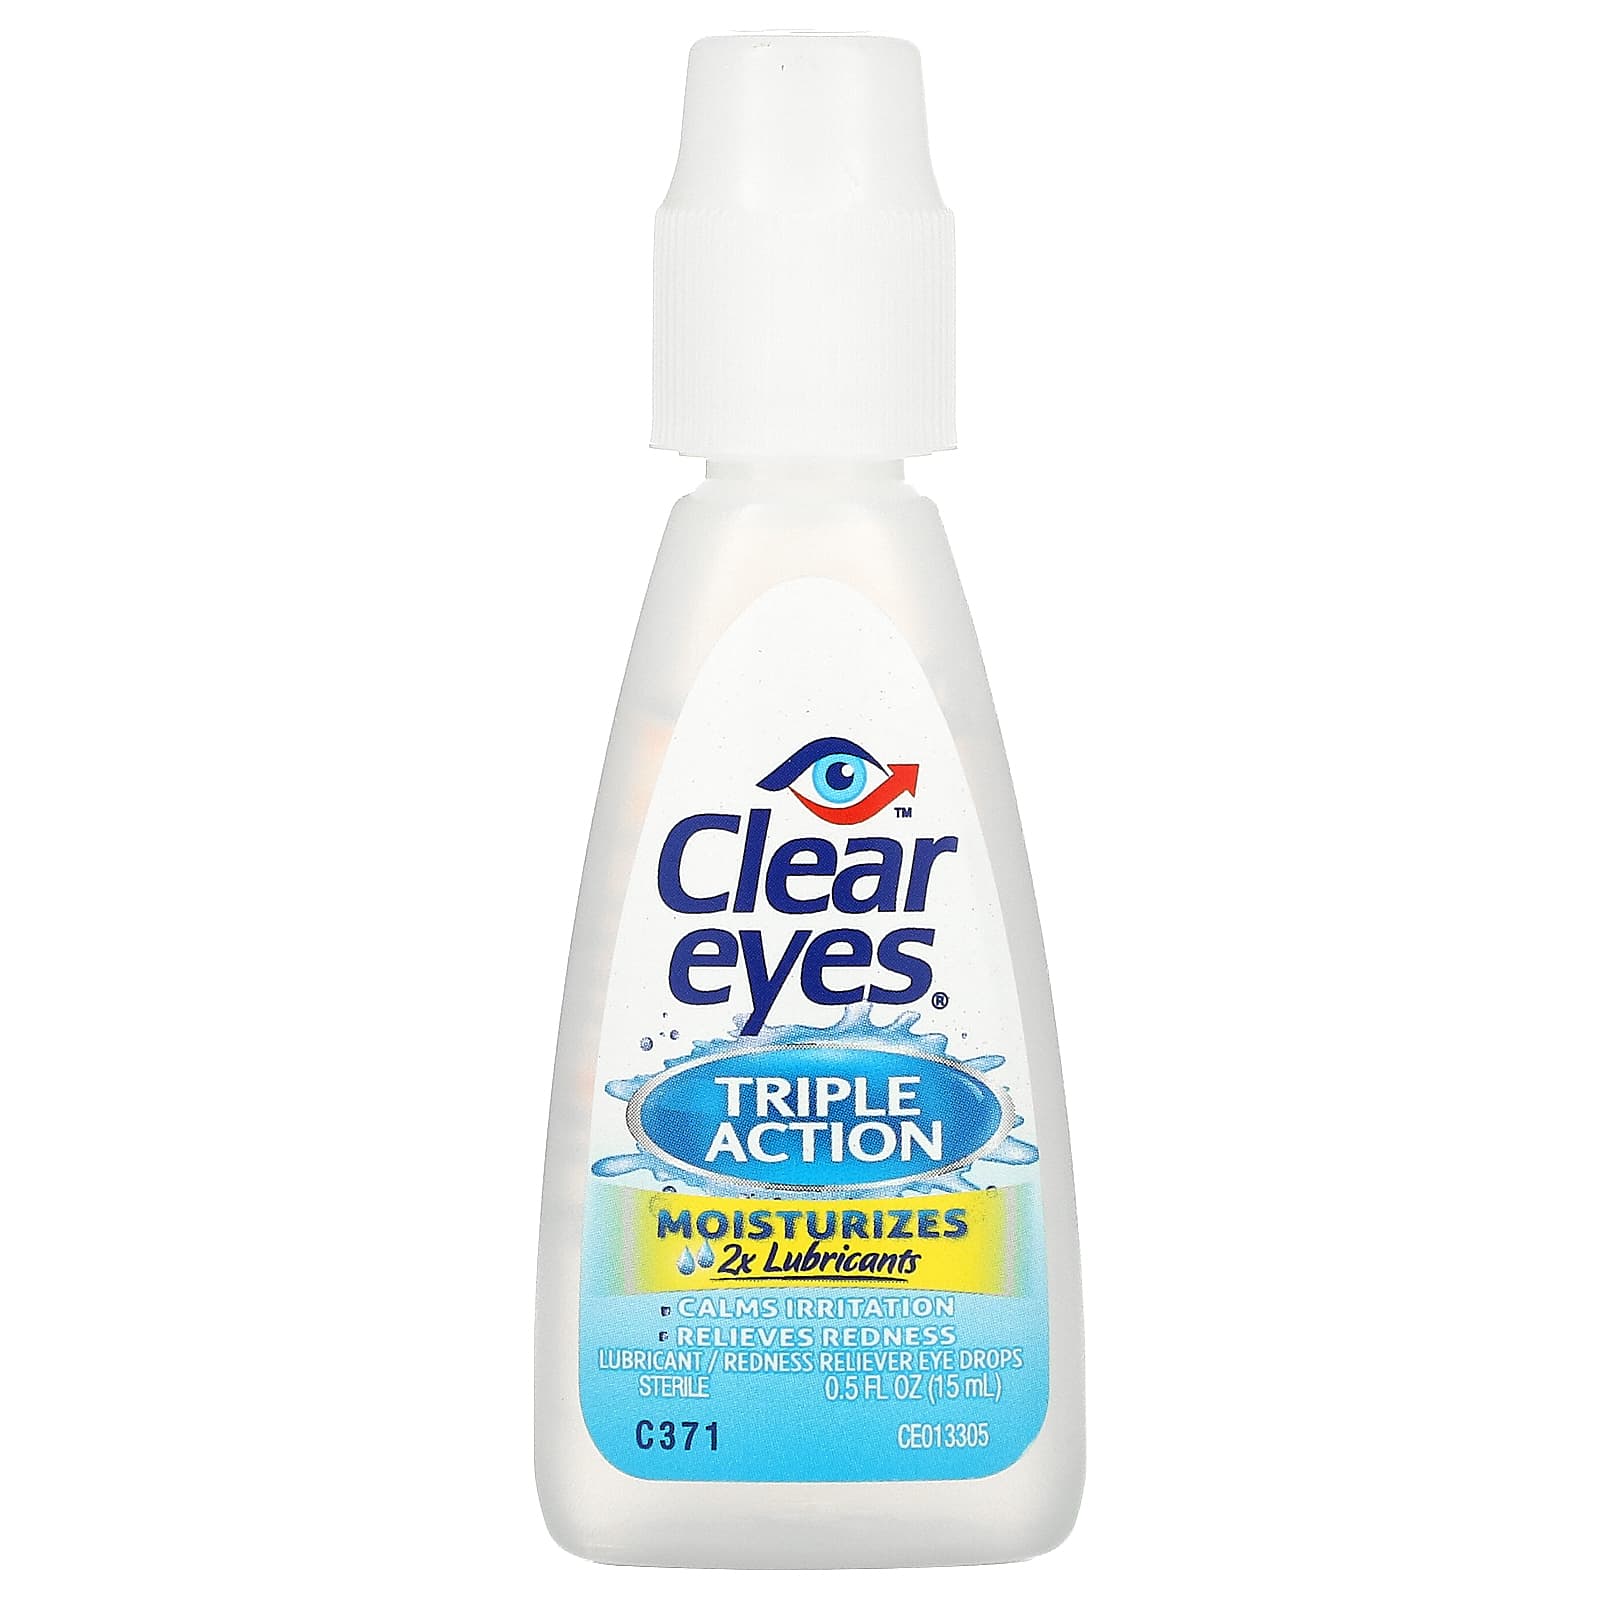 Clear eyes текст. Clear Eyes капли. Clear Eyes трек. Clear Eyes.